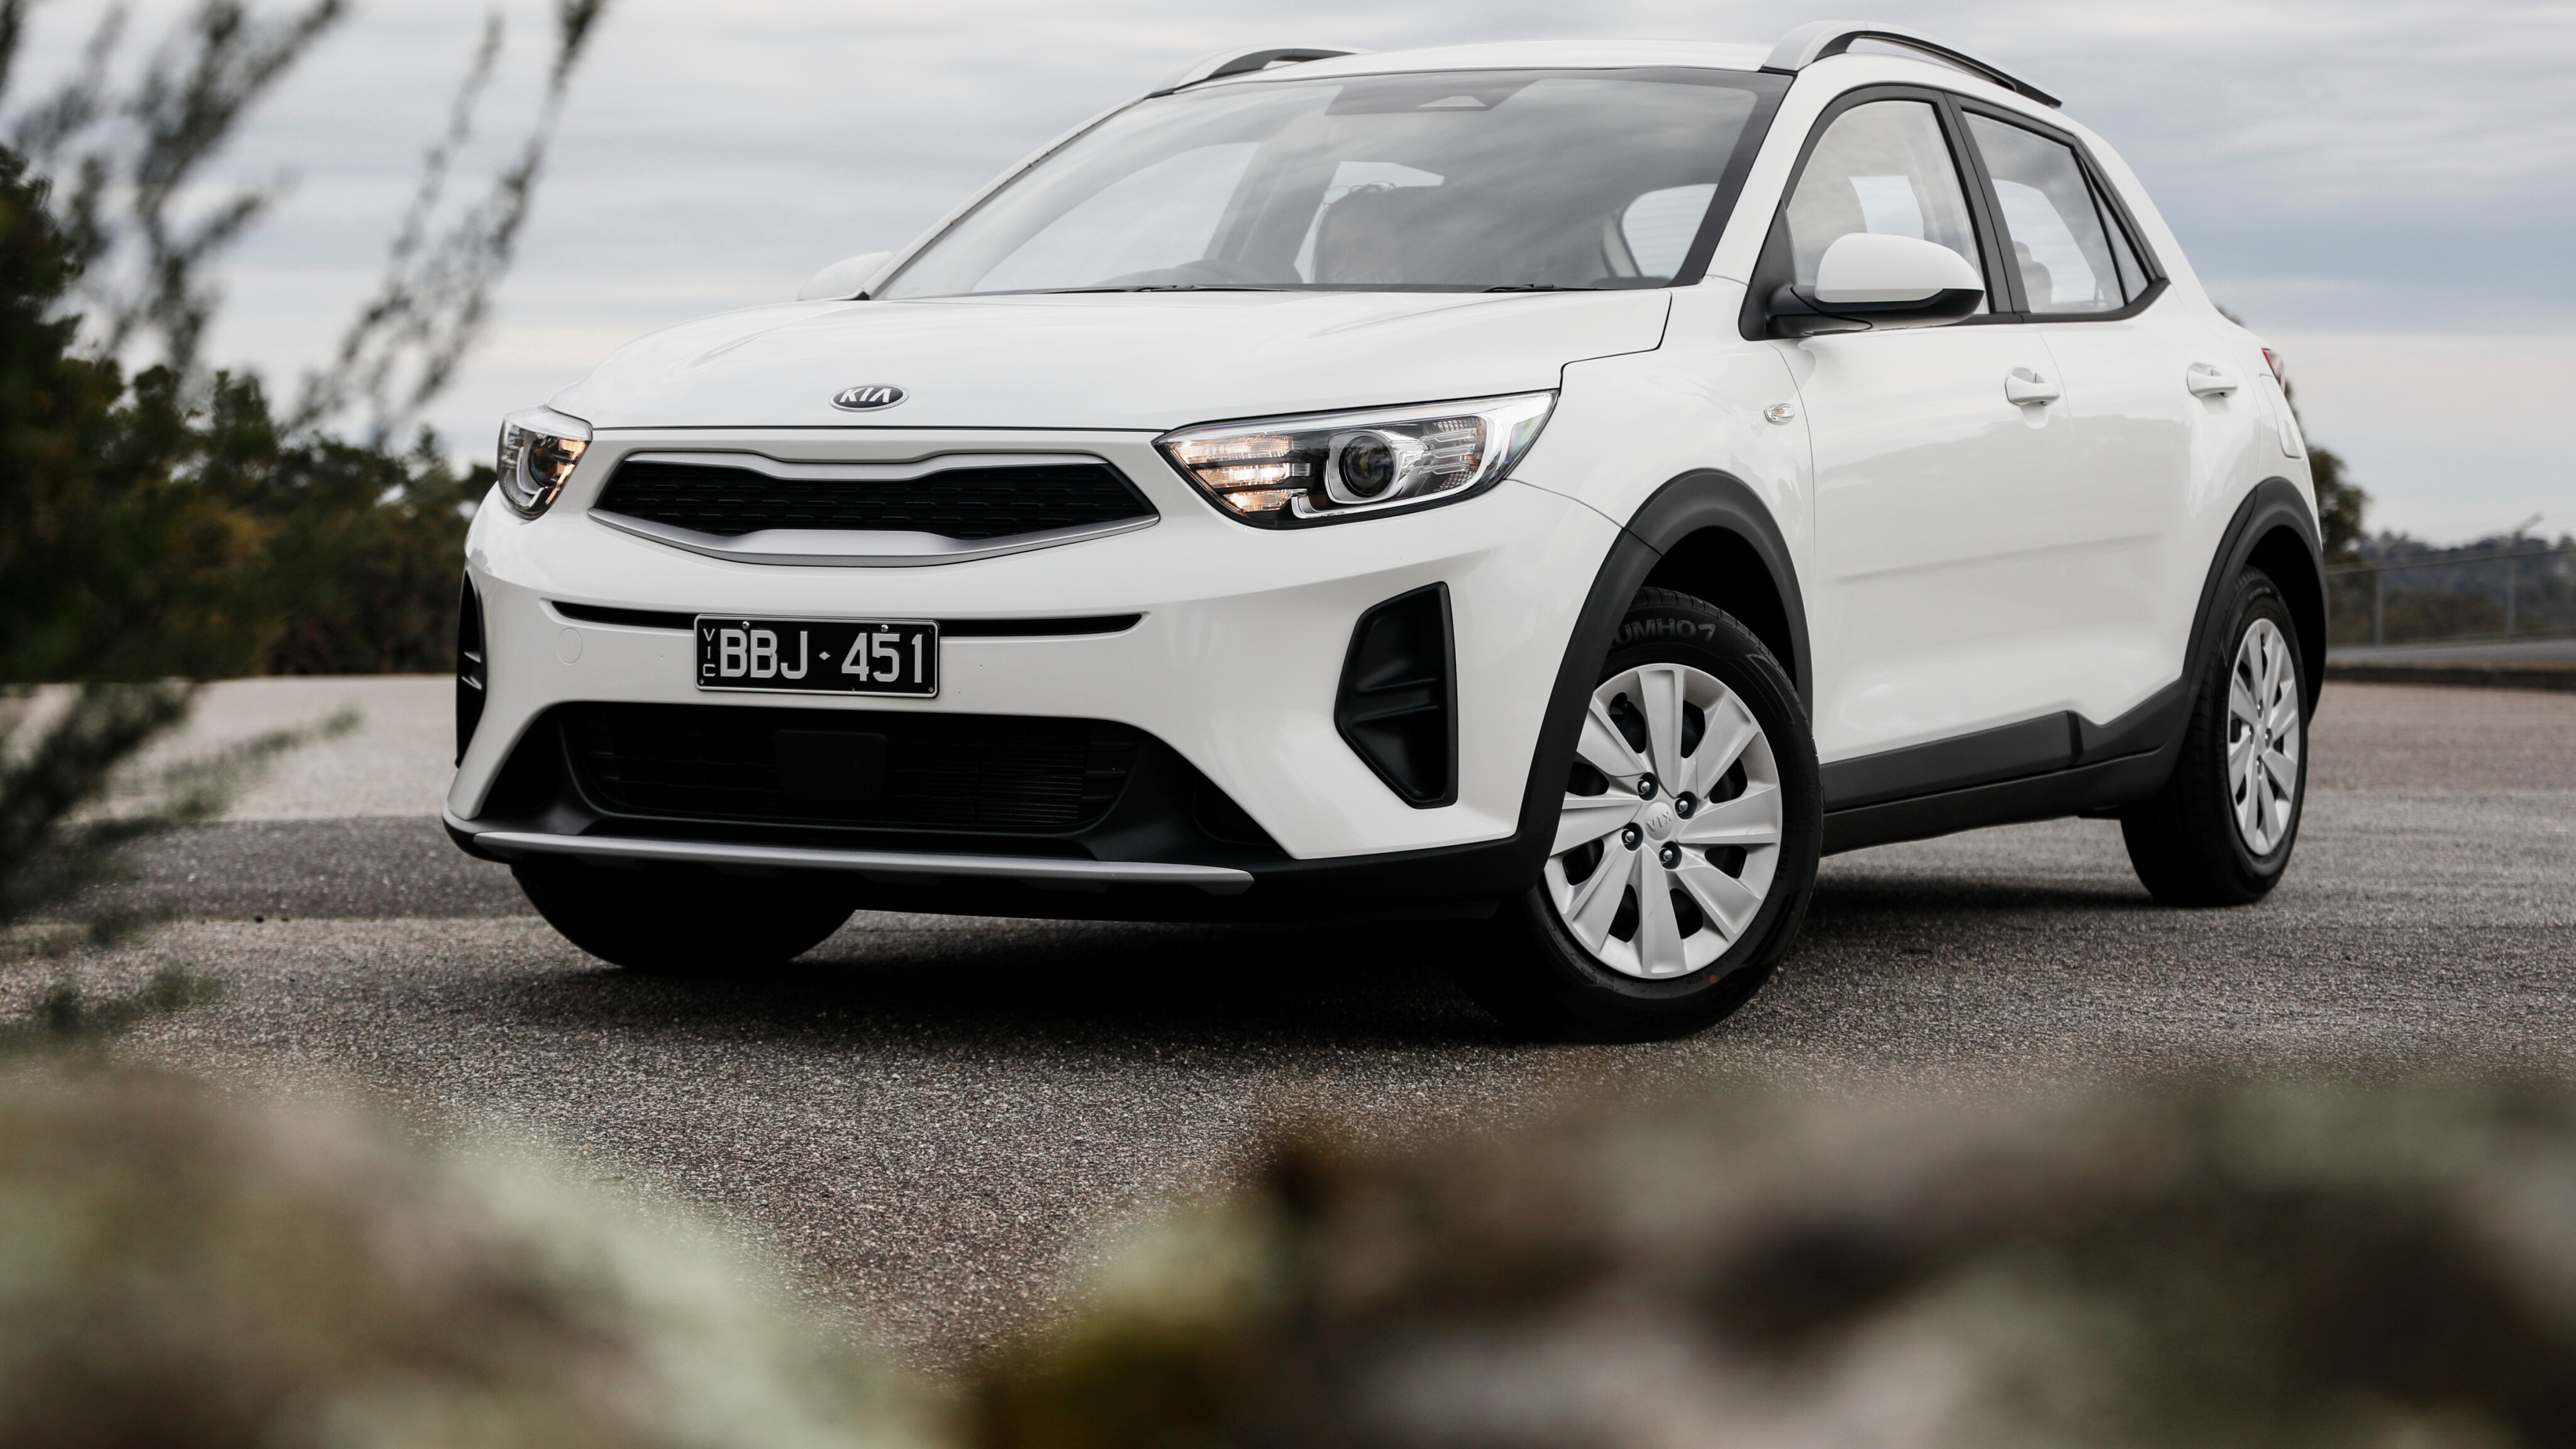 2021 Kia Stonic S Review: Big boot and affordable buying